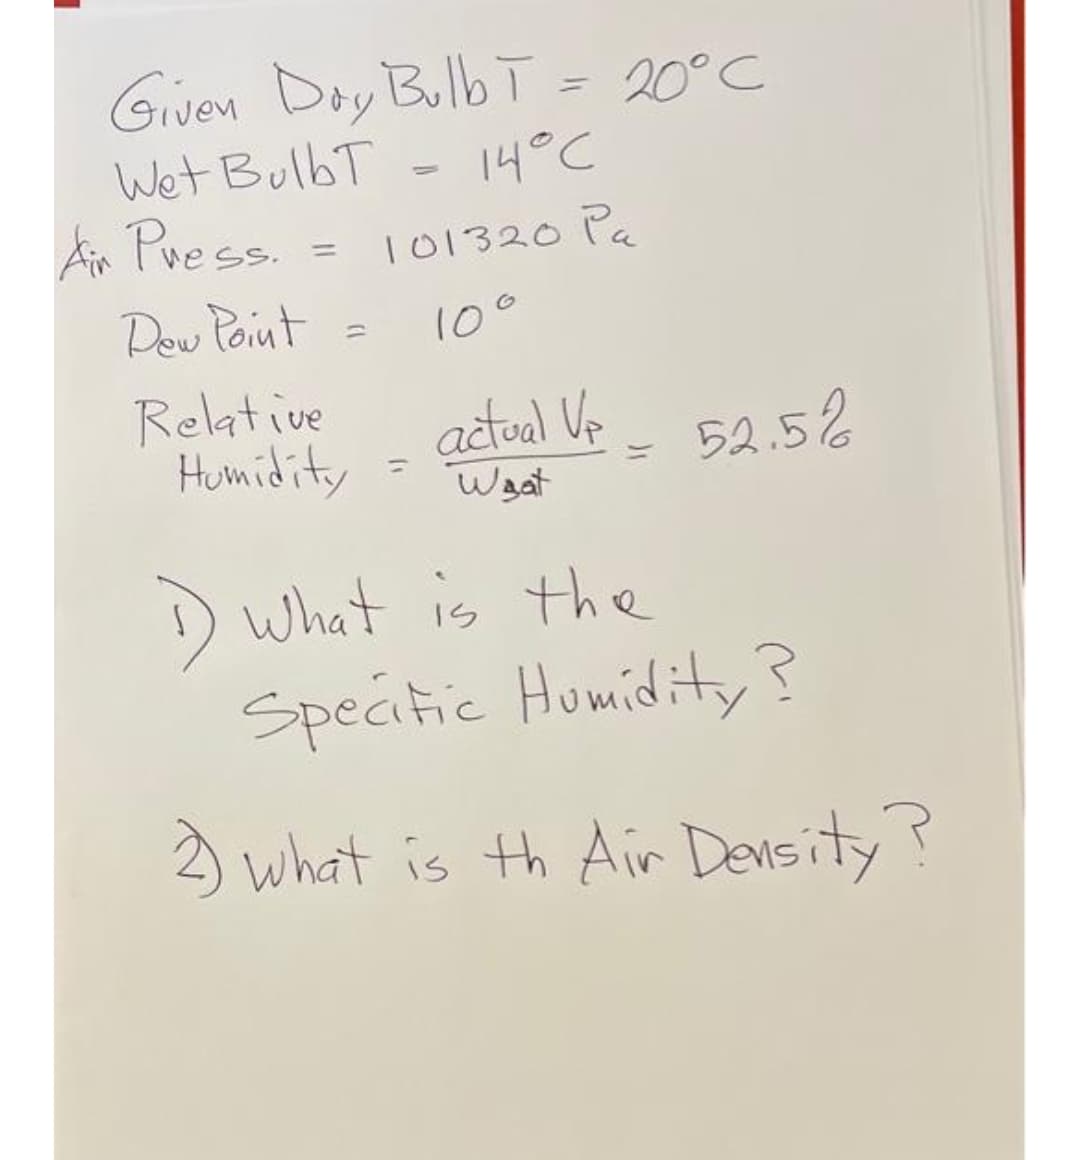 Given Doy Bulb ī = 20°C
Wet BulbT
14°C
Ar Pvess. =
101320 Pa
%3D
Dow Point
10°
Relative
Humidity
actoal Ve
Waat
52.5%
) what is the
Speaitic Humidity ?
) what is th Air Devsity?
